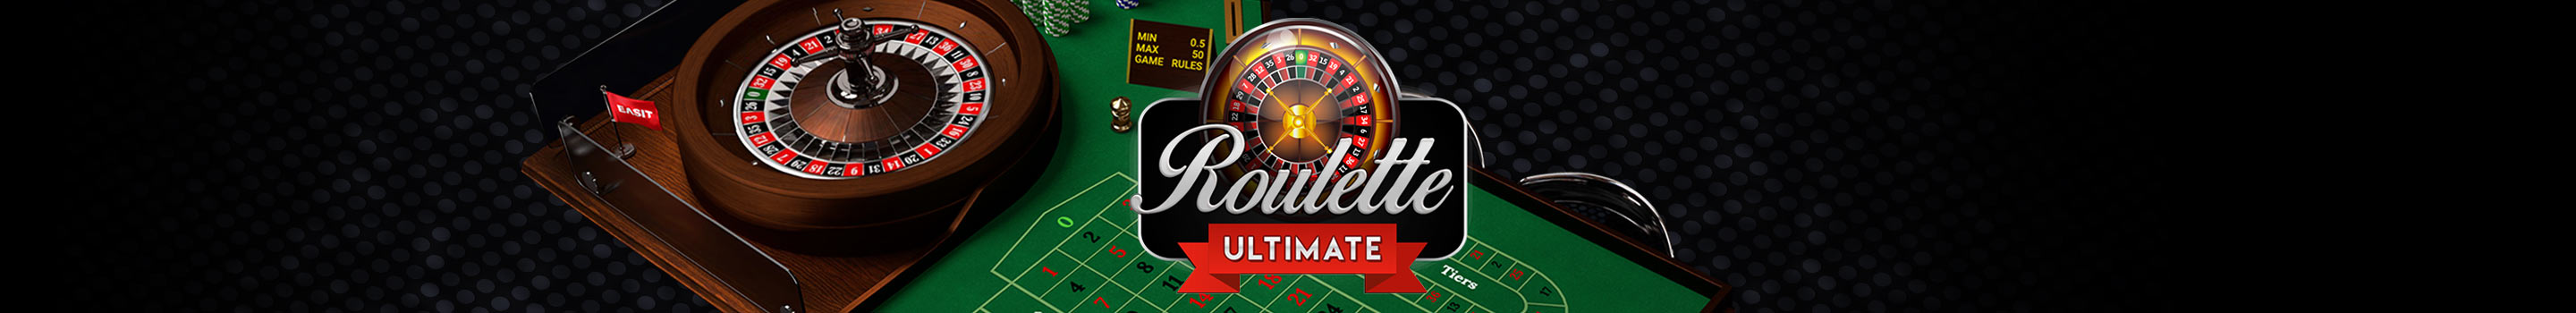 Roulette Ultimate